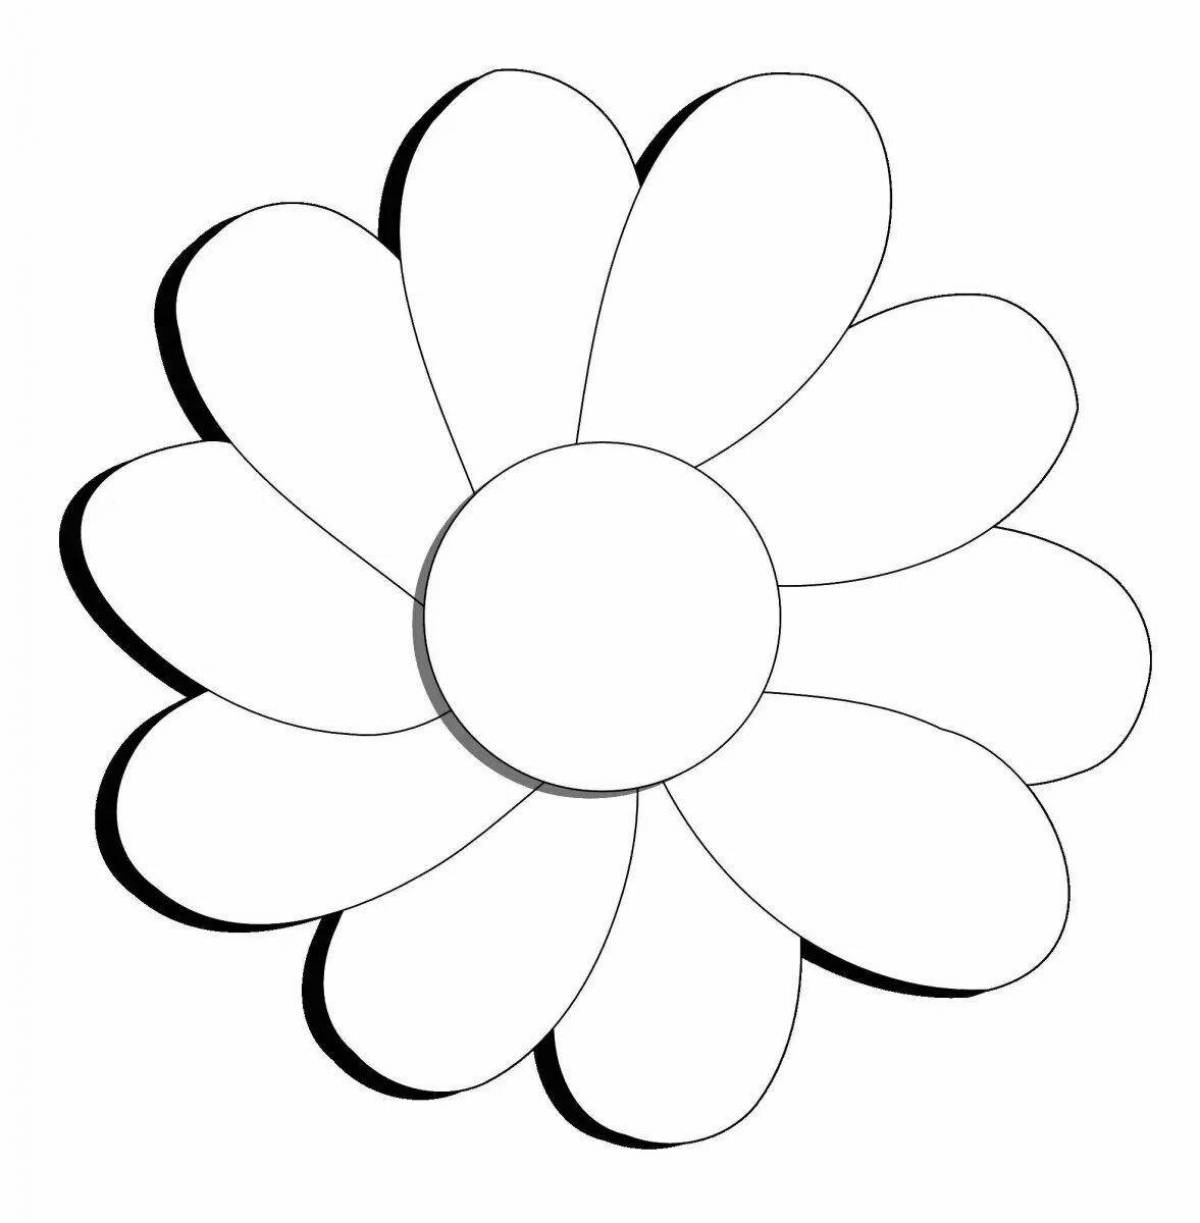 Amazing daisy flower coloring page for toddlers